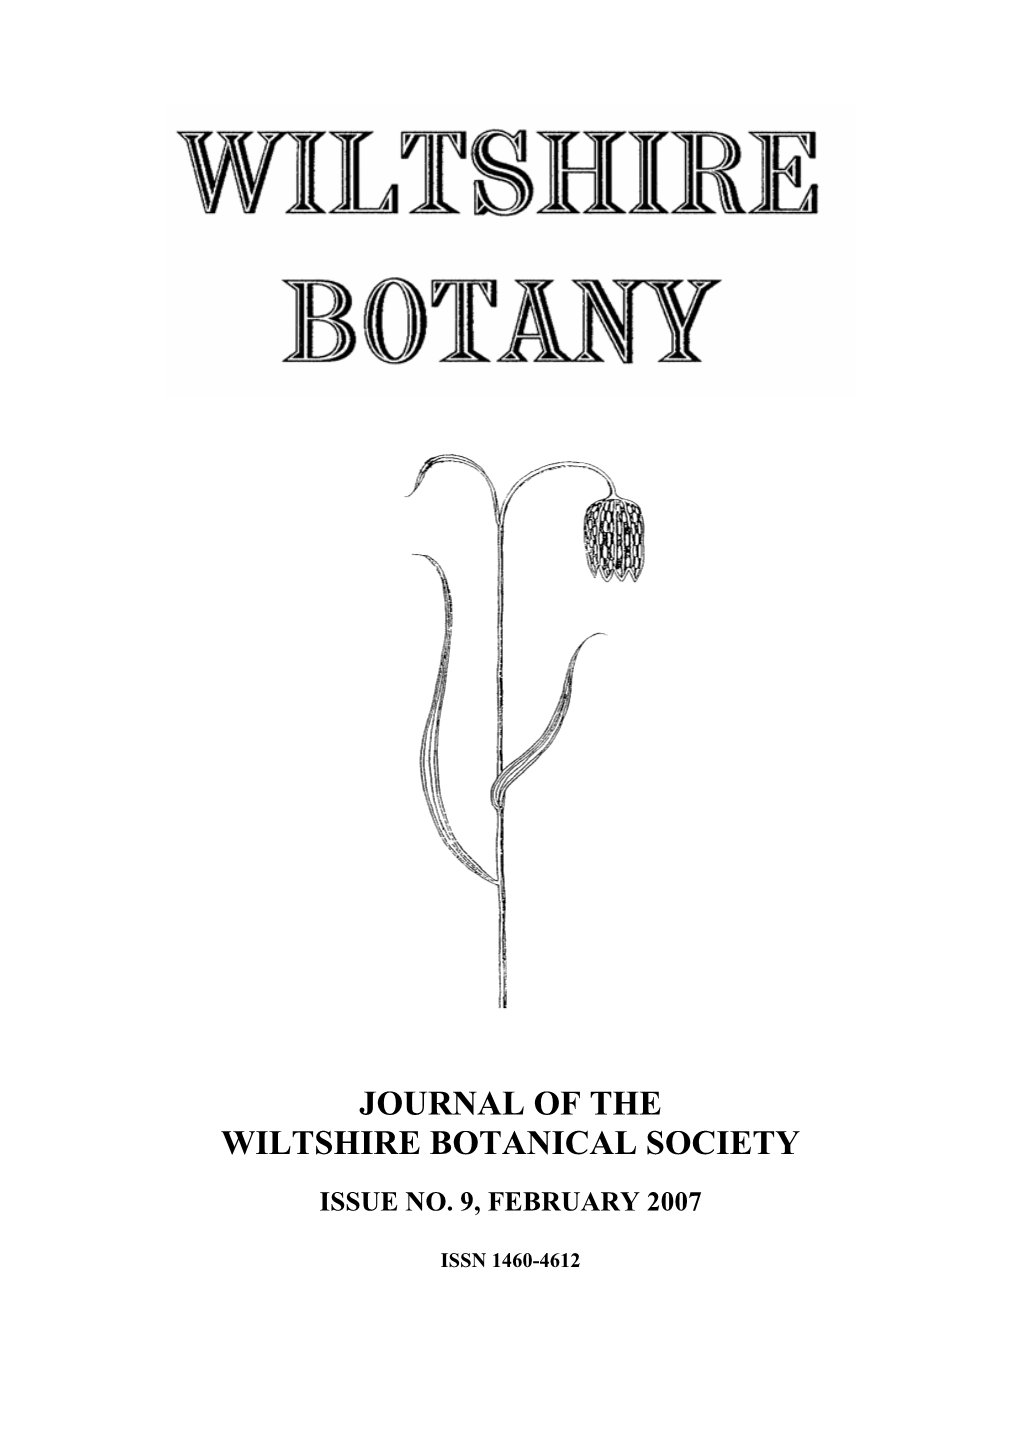 Journal of the Wiltshire Botanical Society